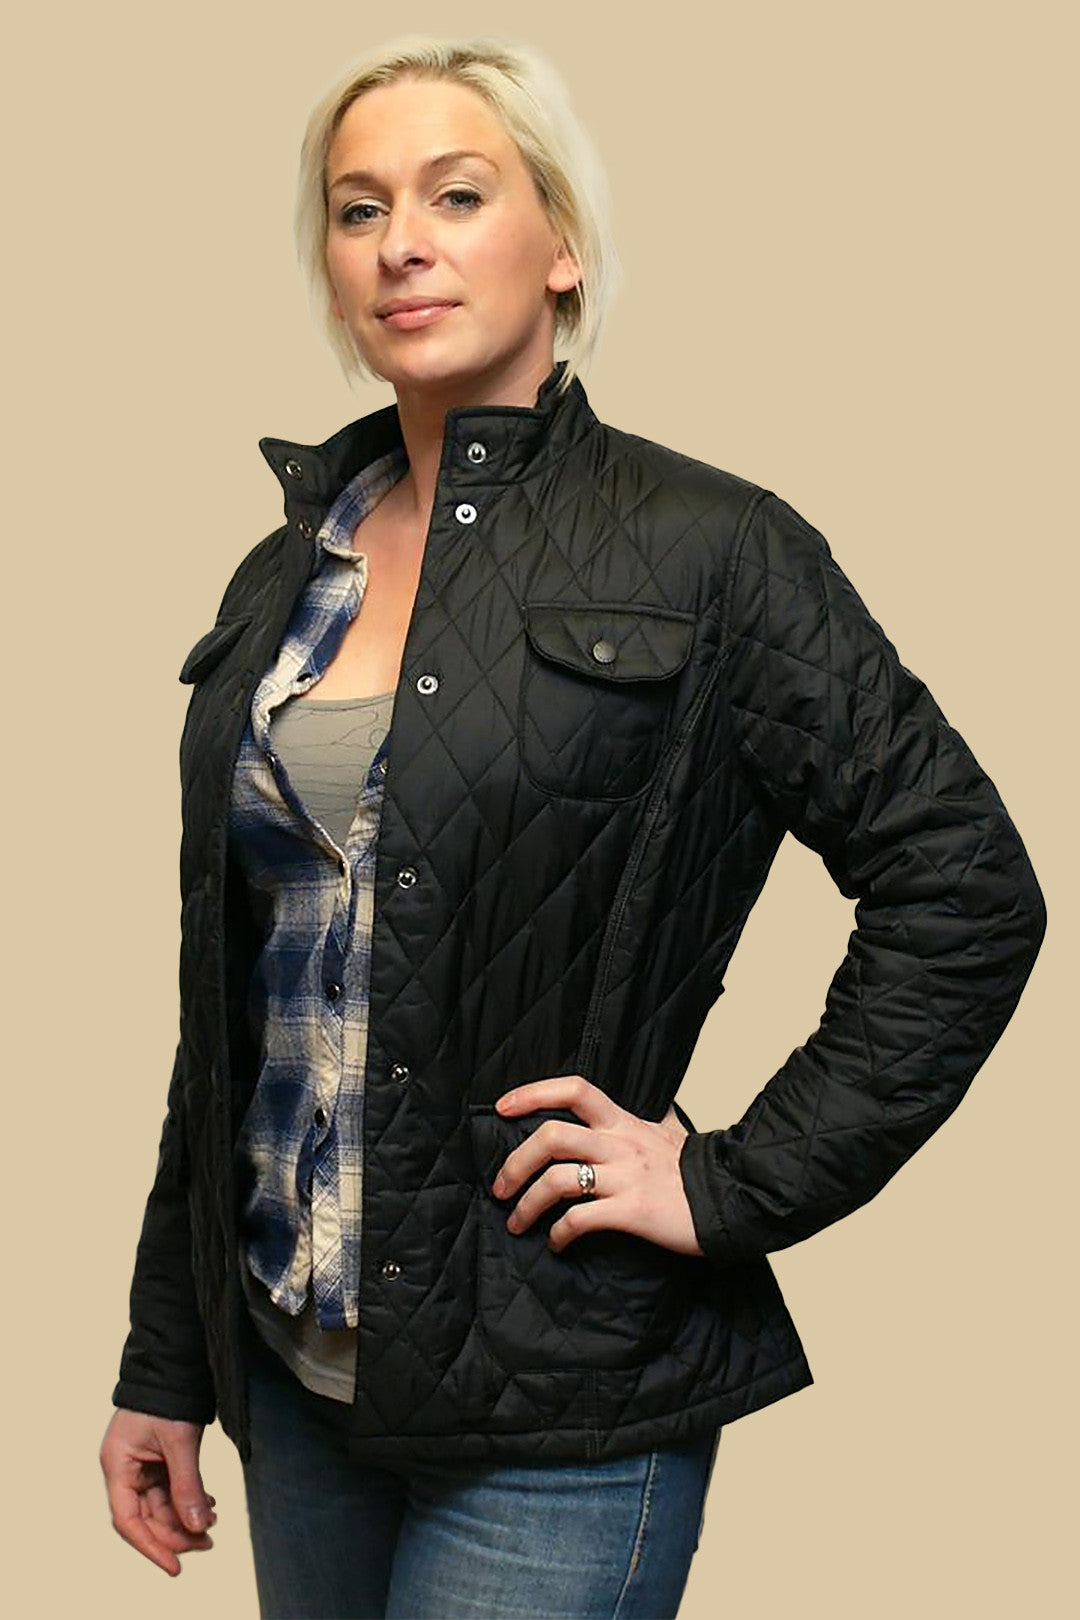 fitted barbour jackets ladies